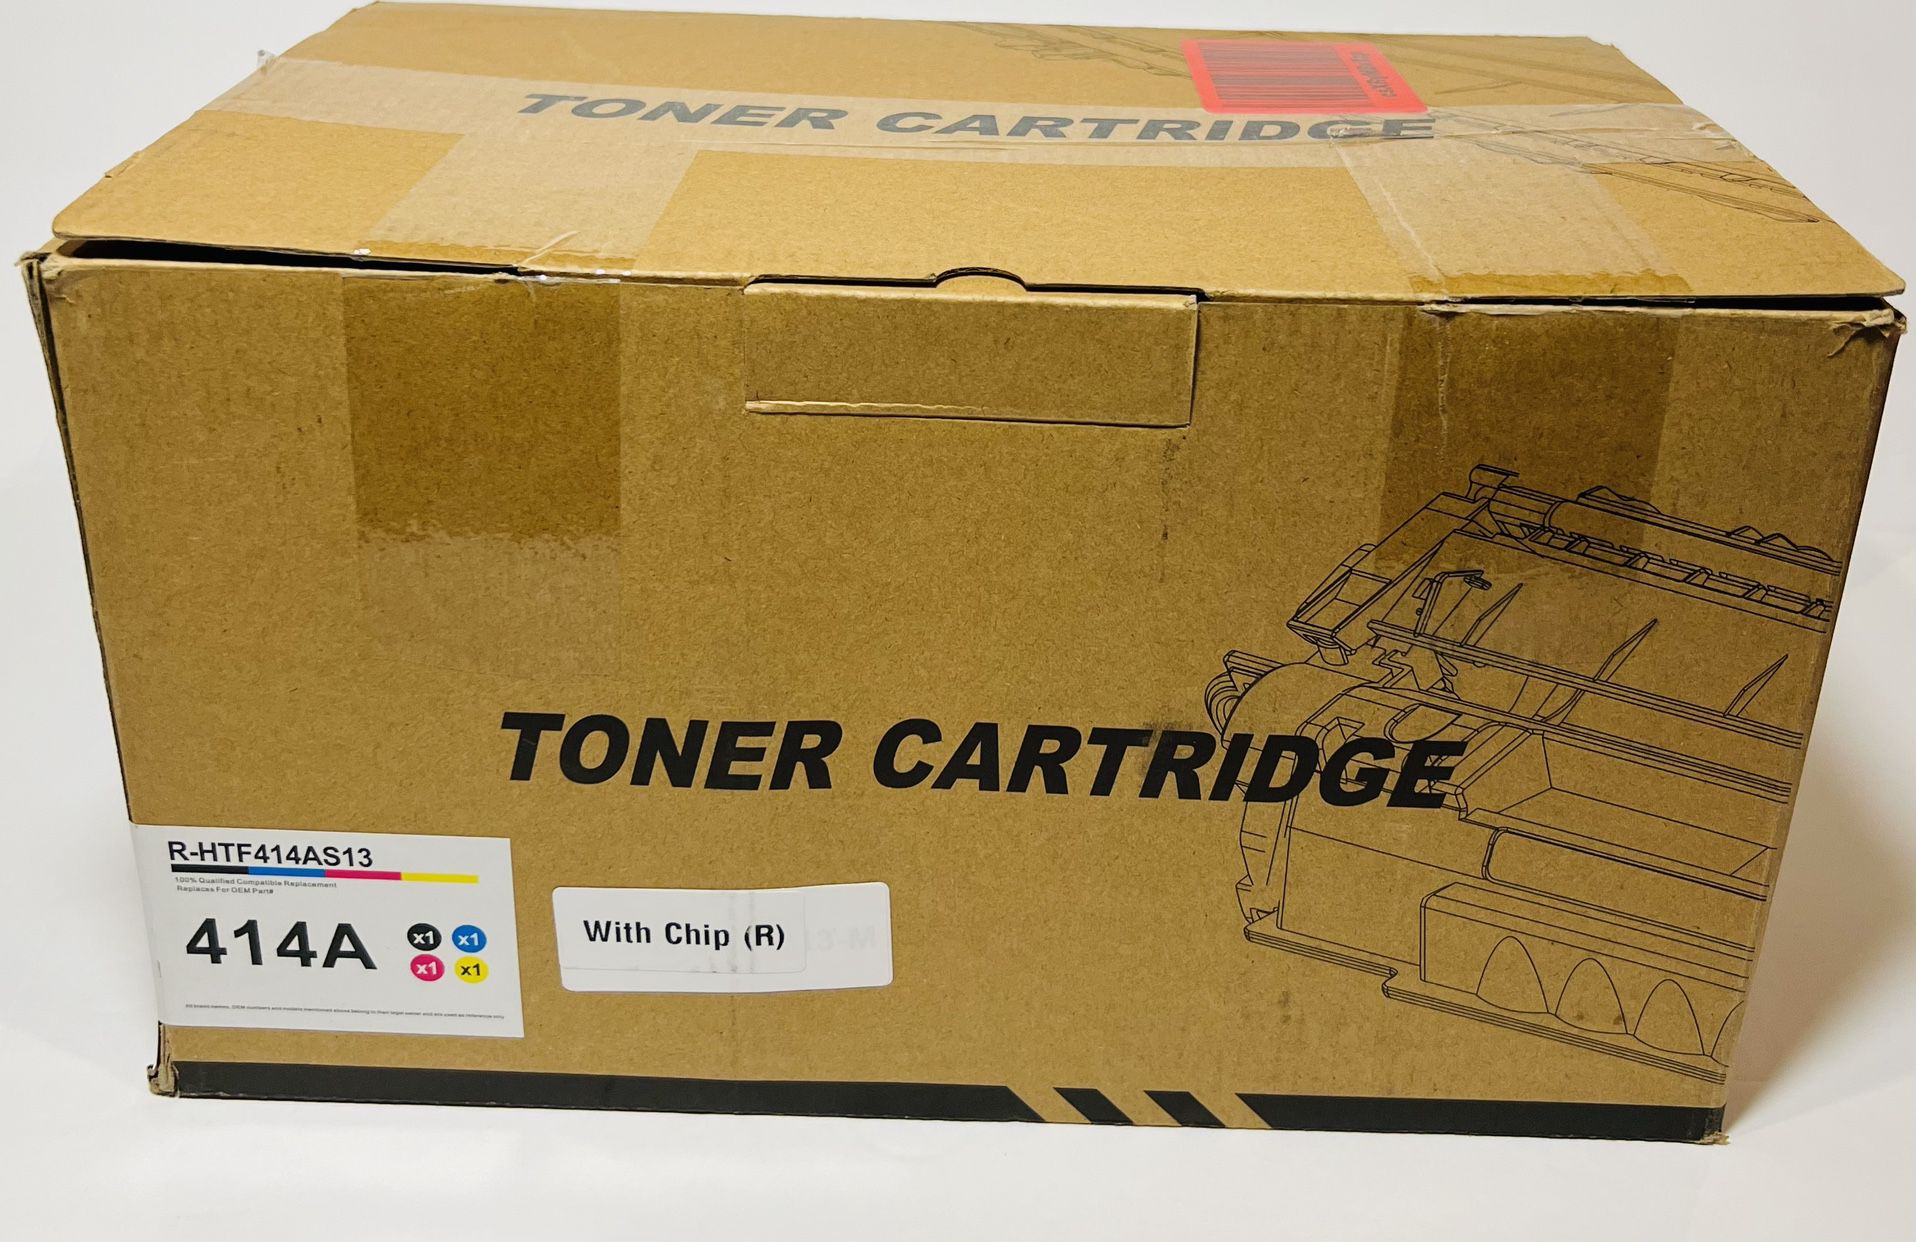 Toner Cartridge 414A With Chip